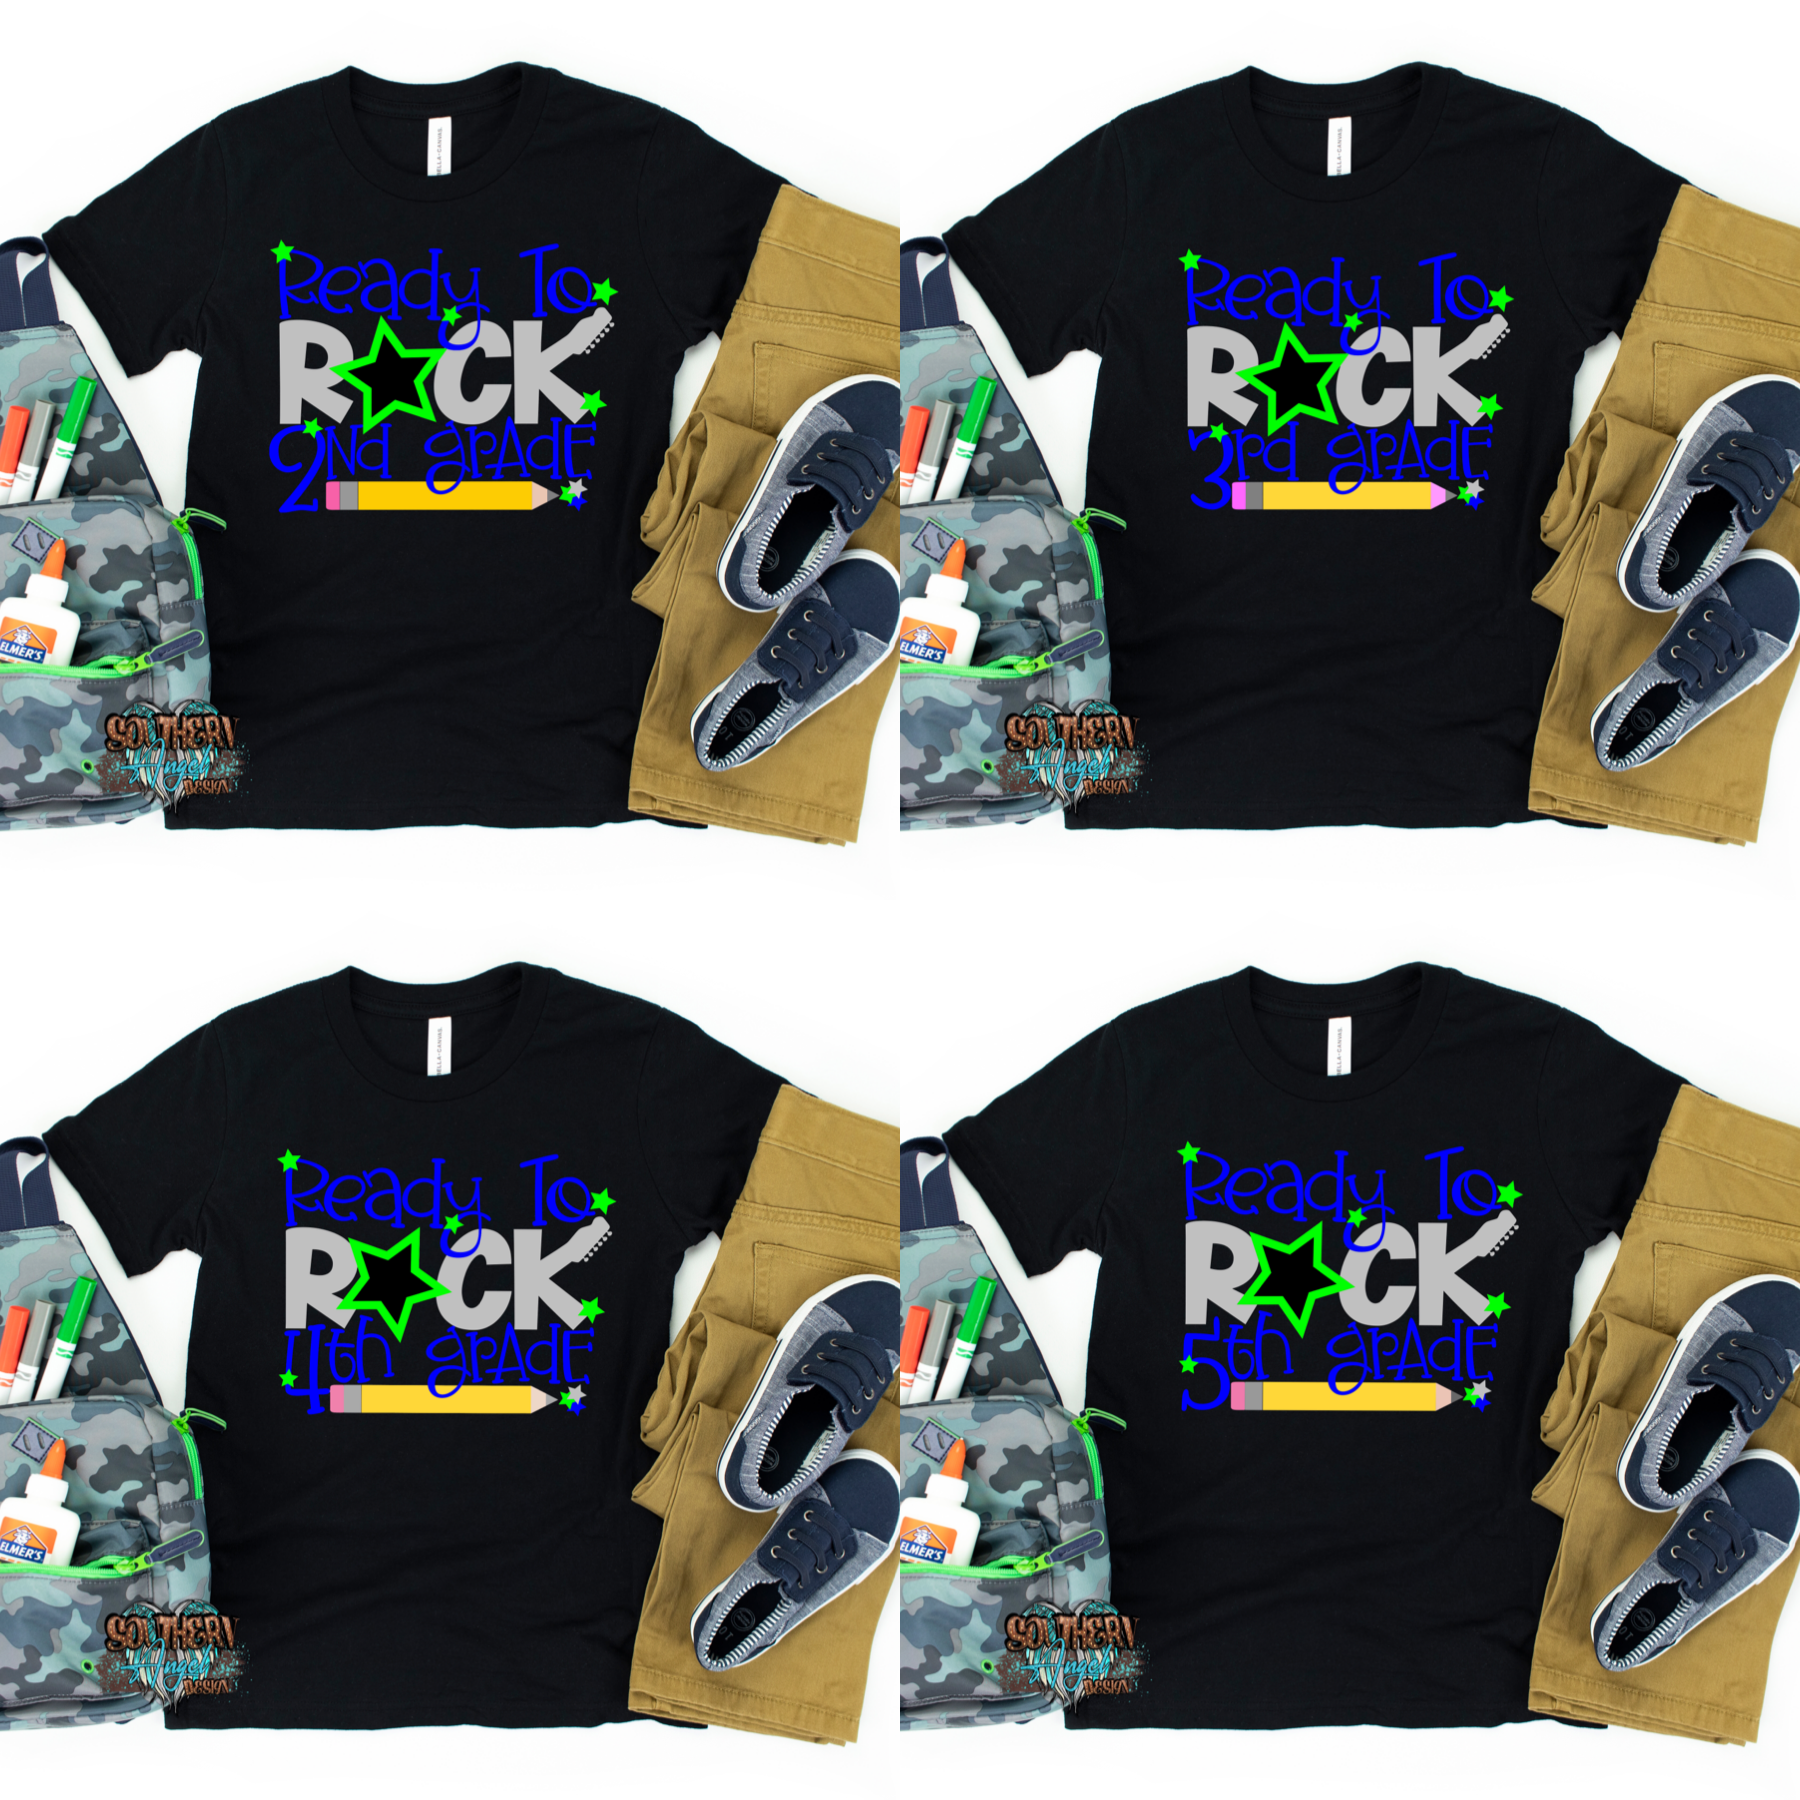 Black Ready To Rock Pre-K image_a7af7ee5-187c-4406-a3f3-f37c9ad5167d.png ready-to-rock Back To School